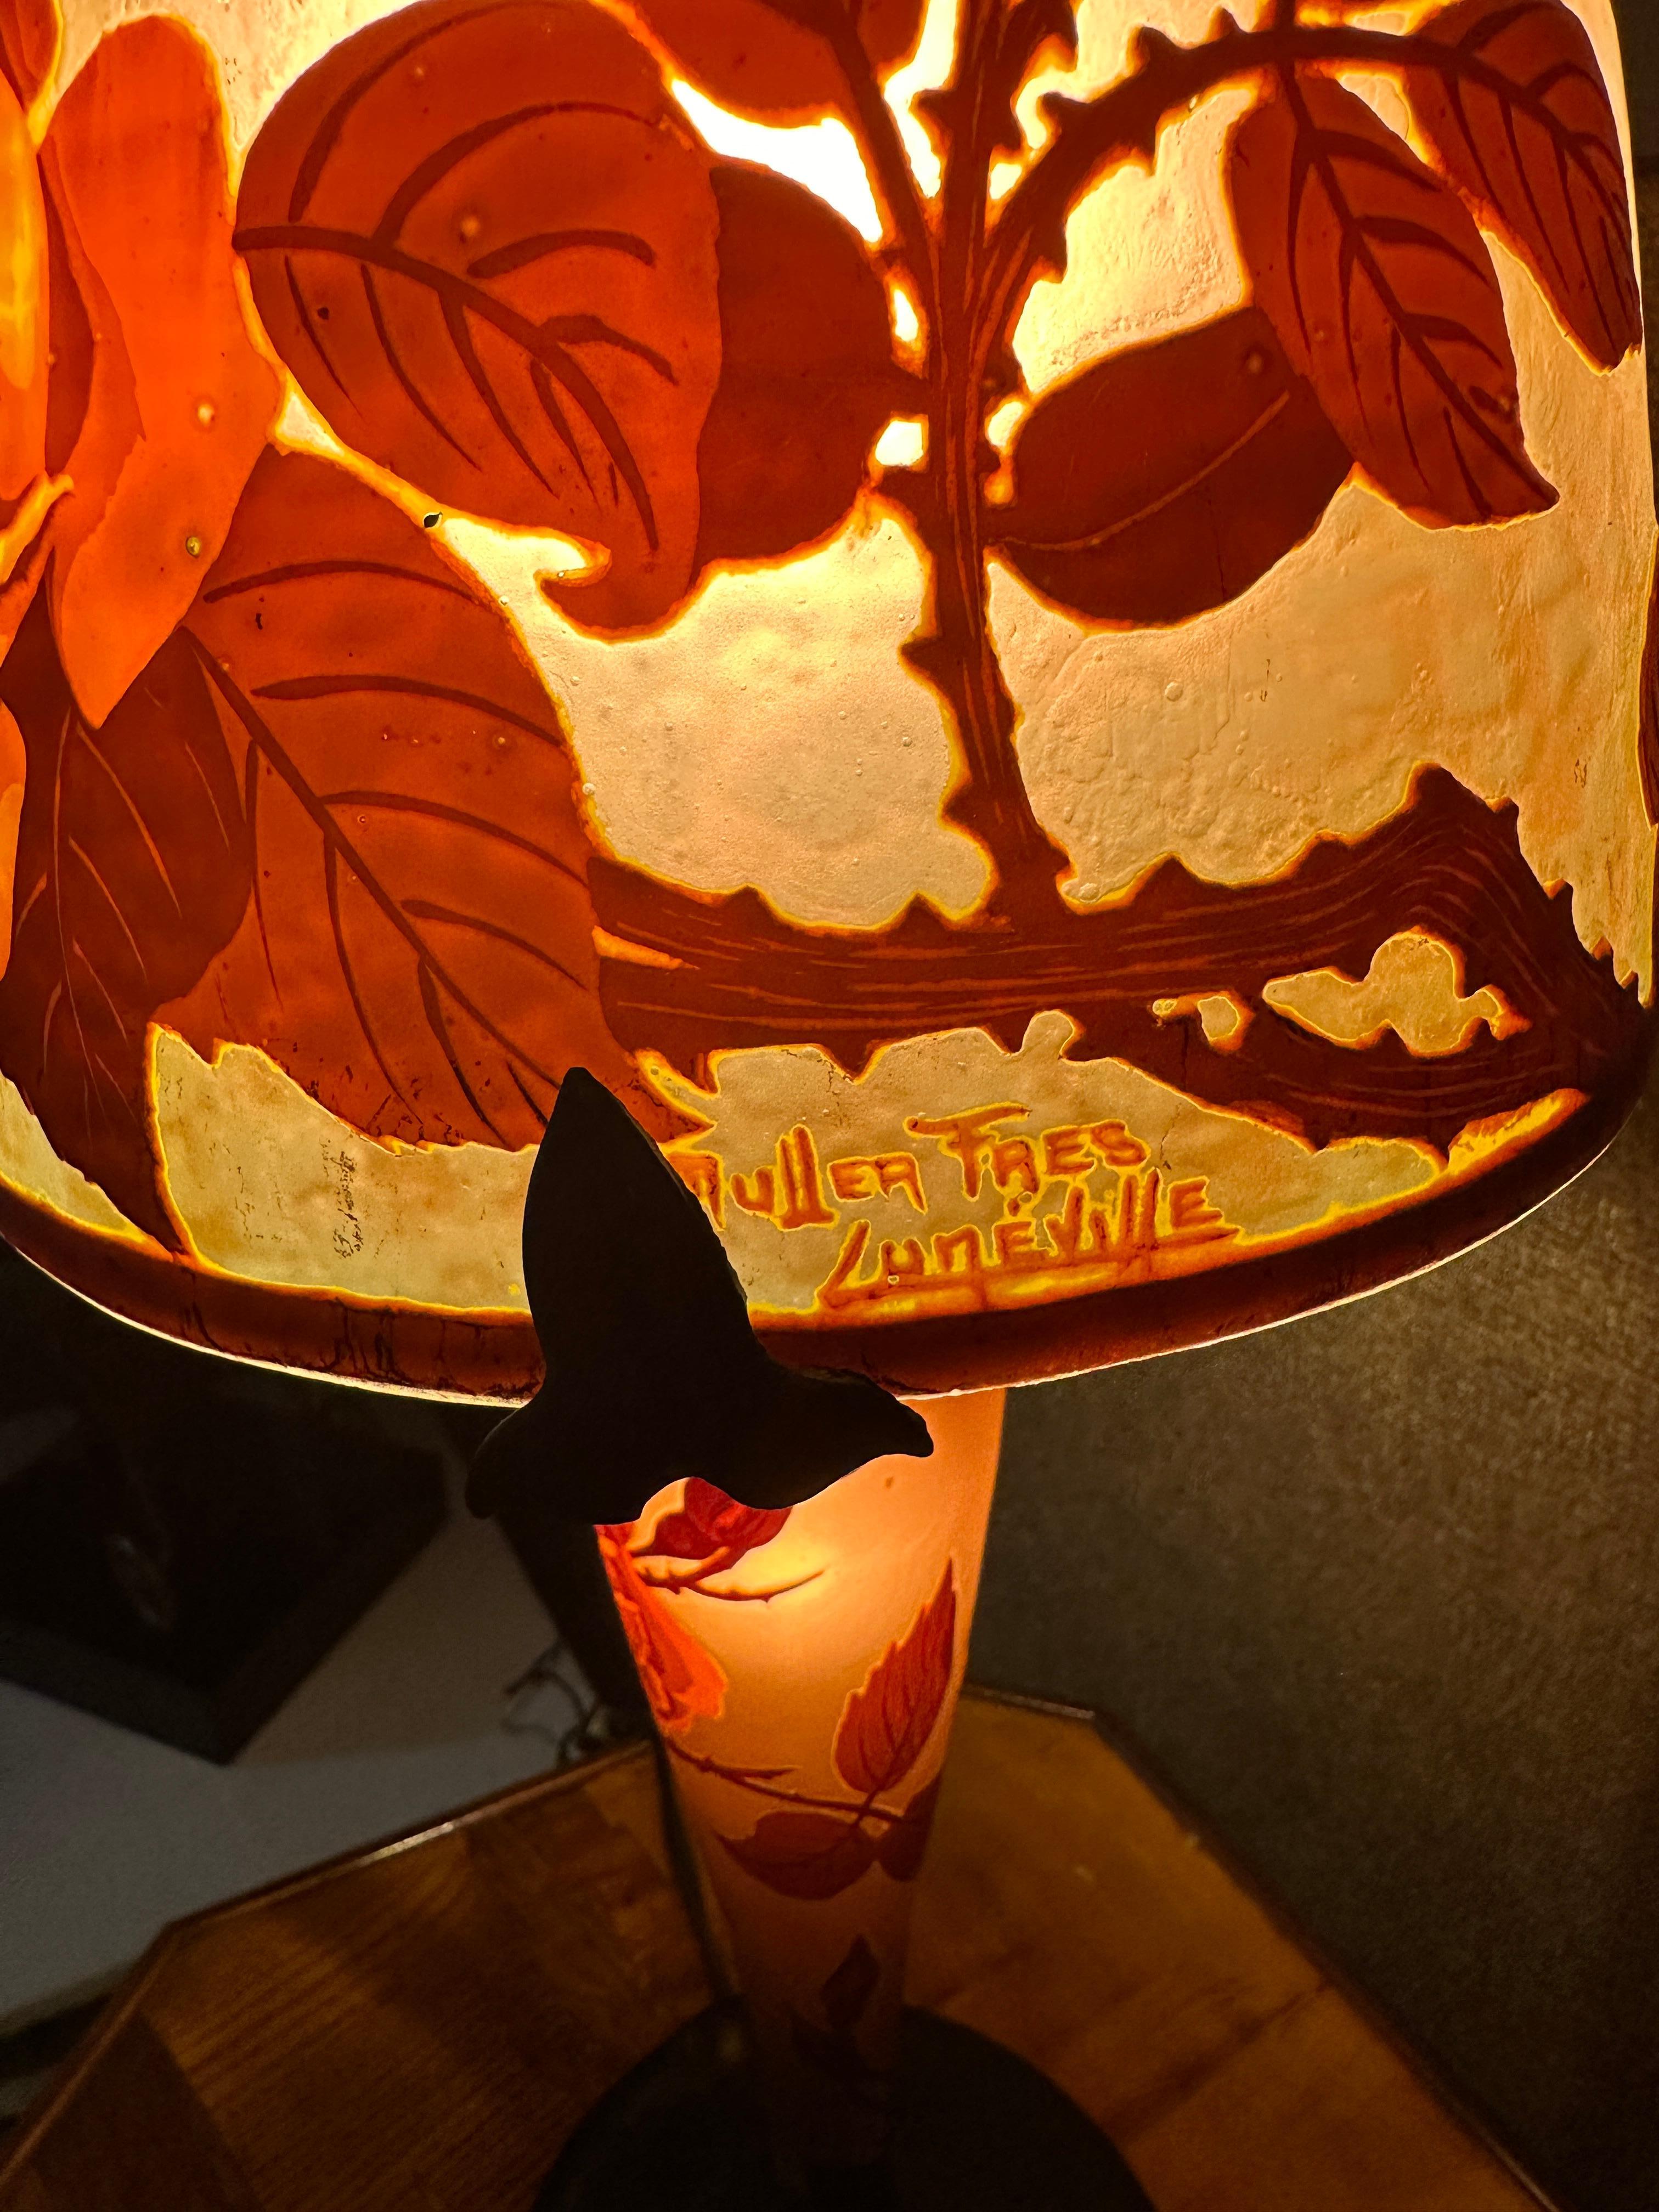 Muller Frères
Boudoir Lamp with Roses, 1910
Acid-etched cameo glass, wrought metal
20h x 8d in
Signed at the arm and the shade cover.

Provenance:
Private Collection, Midwest

Literature:
Glass of Art Nouveau, Yoshimizu, back cover, and page 57